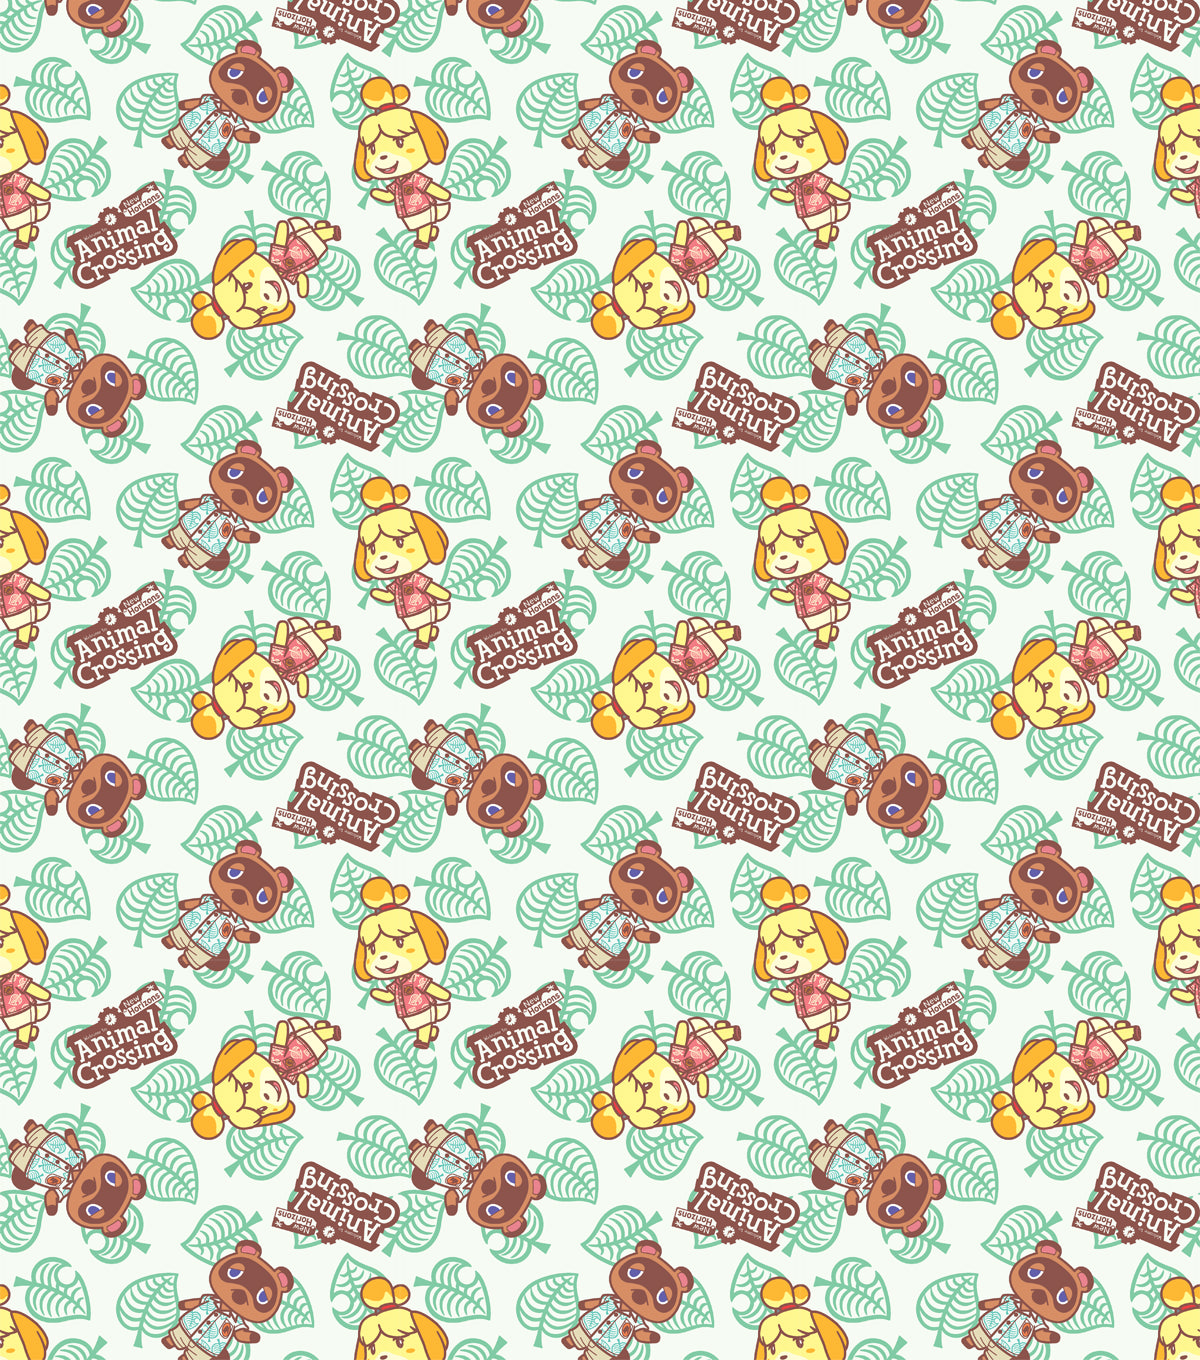 Nintendo Animal Crossing New Horizons Tom and Isabelle Nook Cotton Fabric